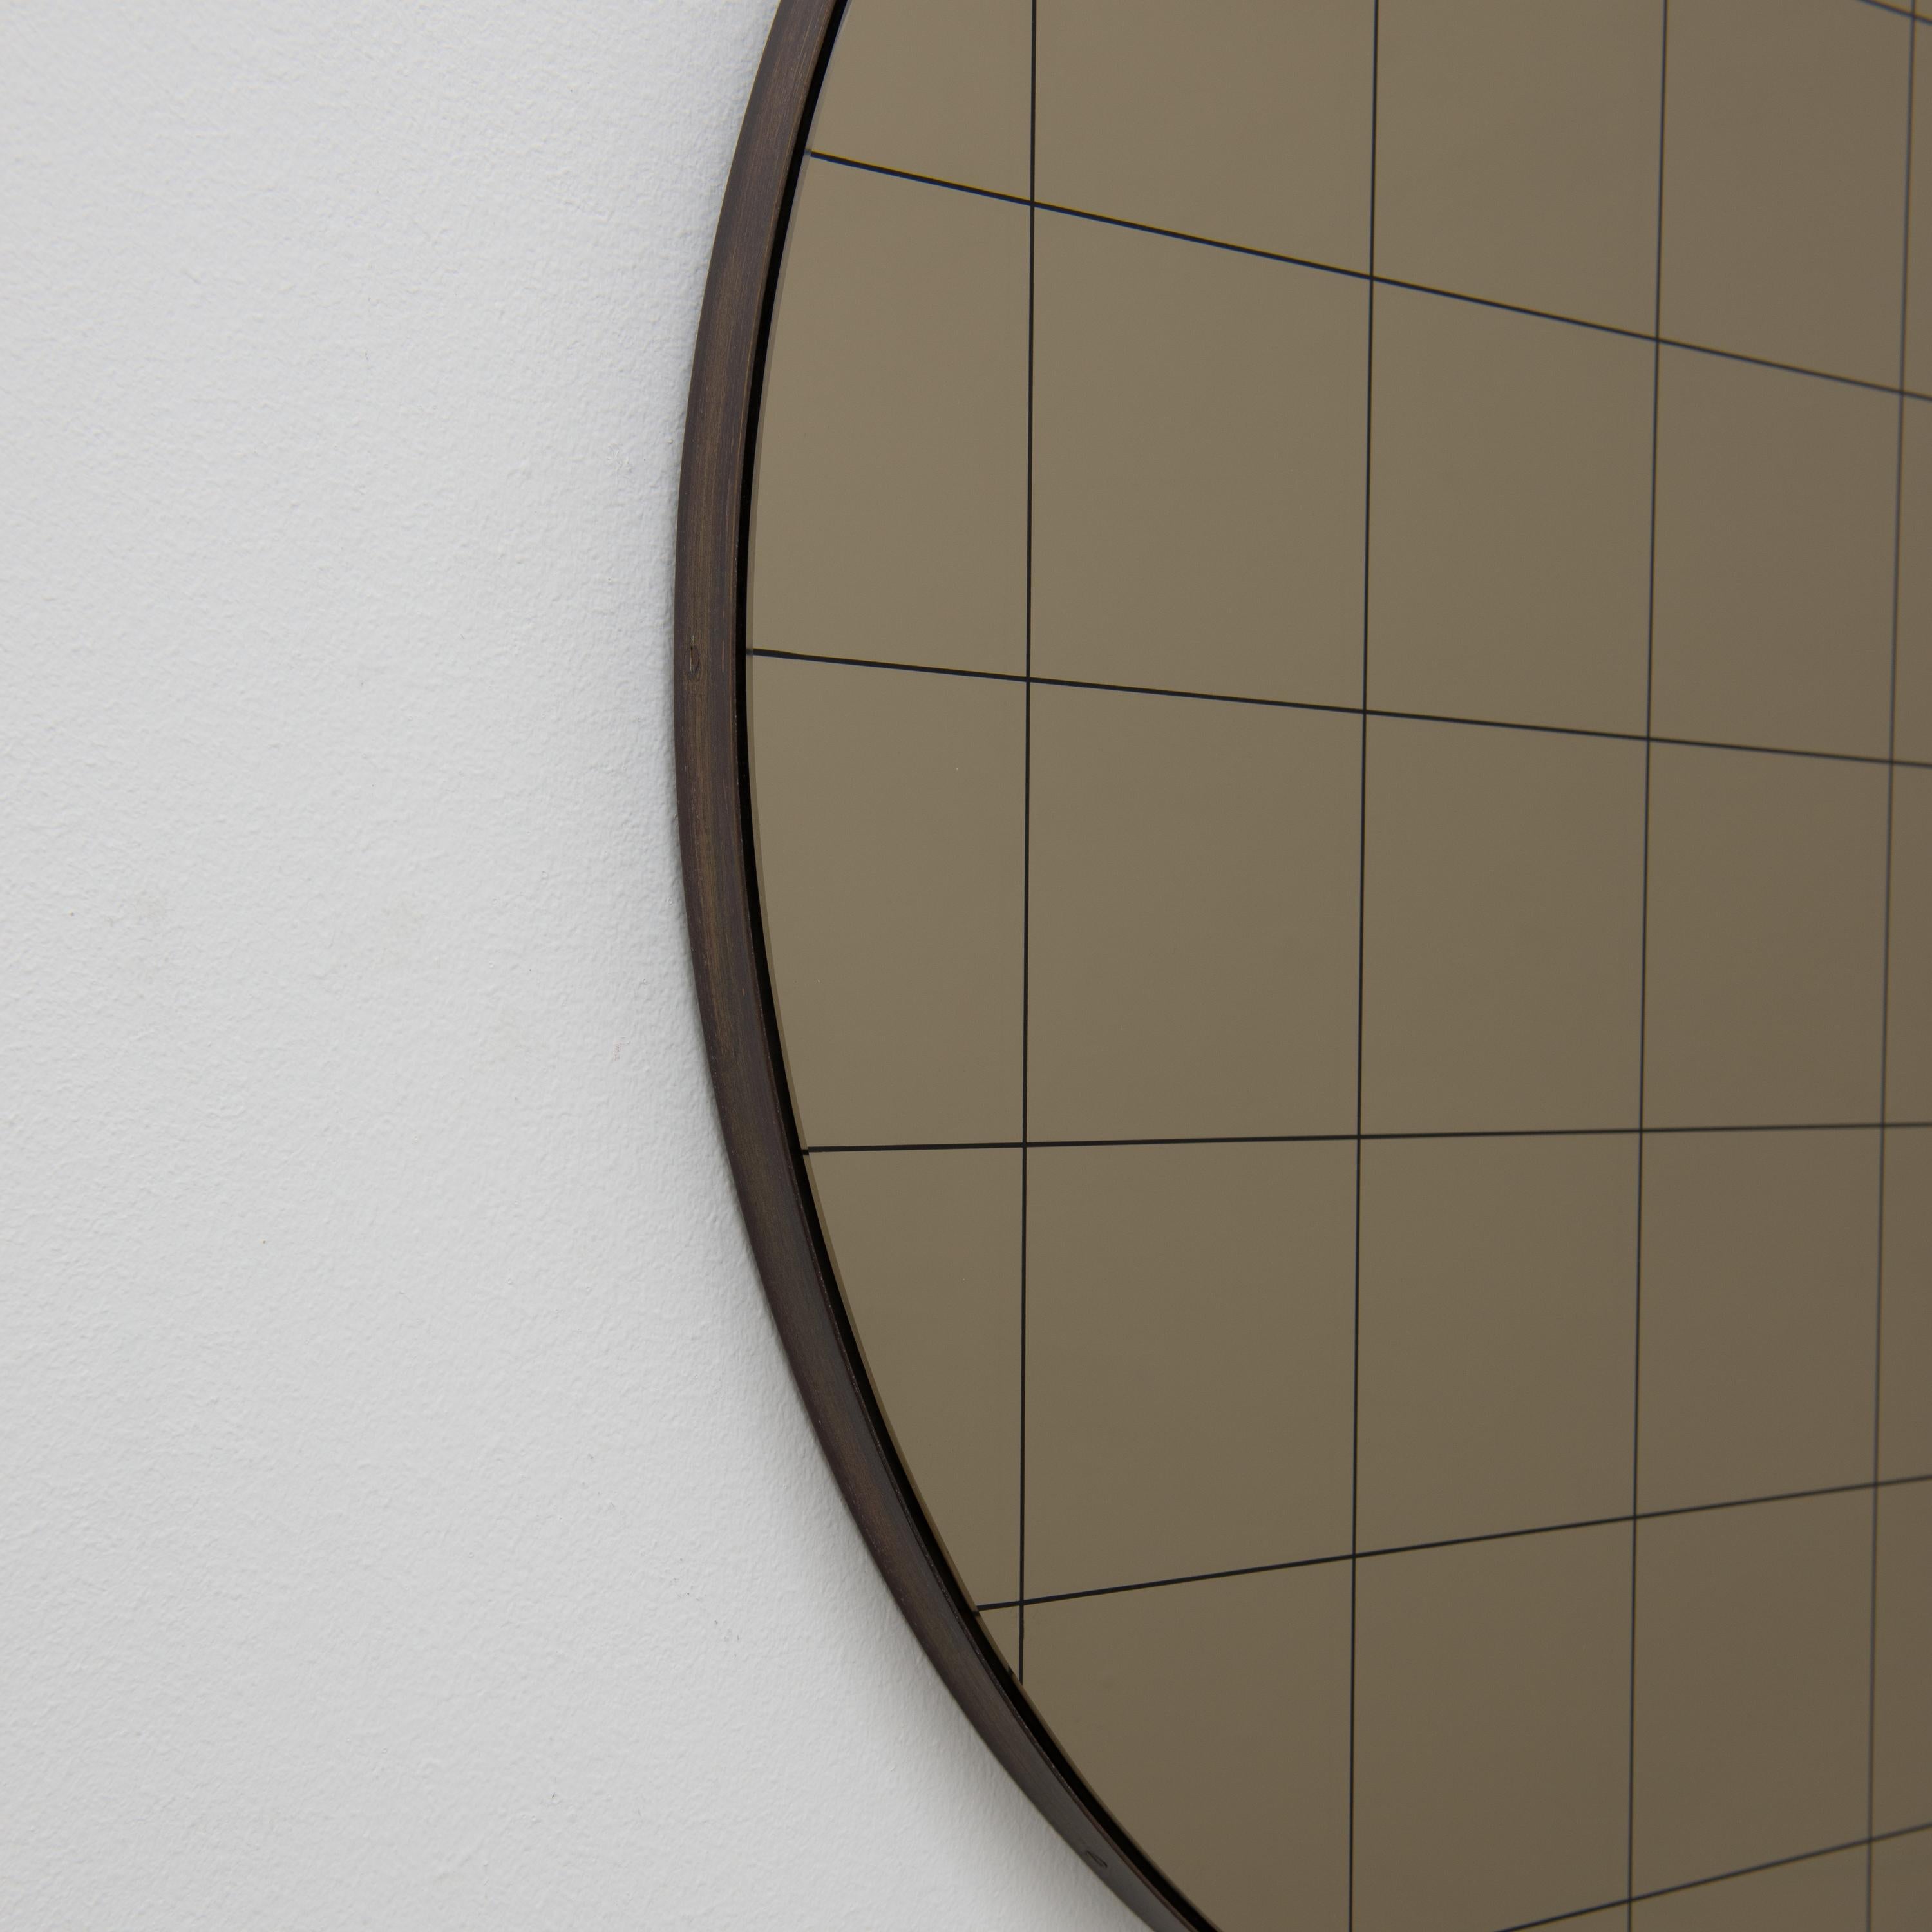 In Stock Orbis Bronze Round Mirror with Patina Frame, Medium In New Condition For Sale In London, GB